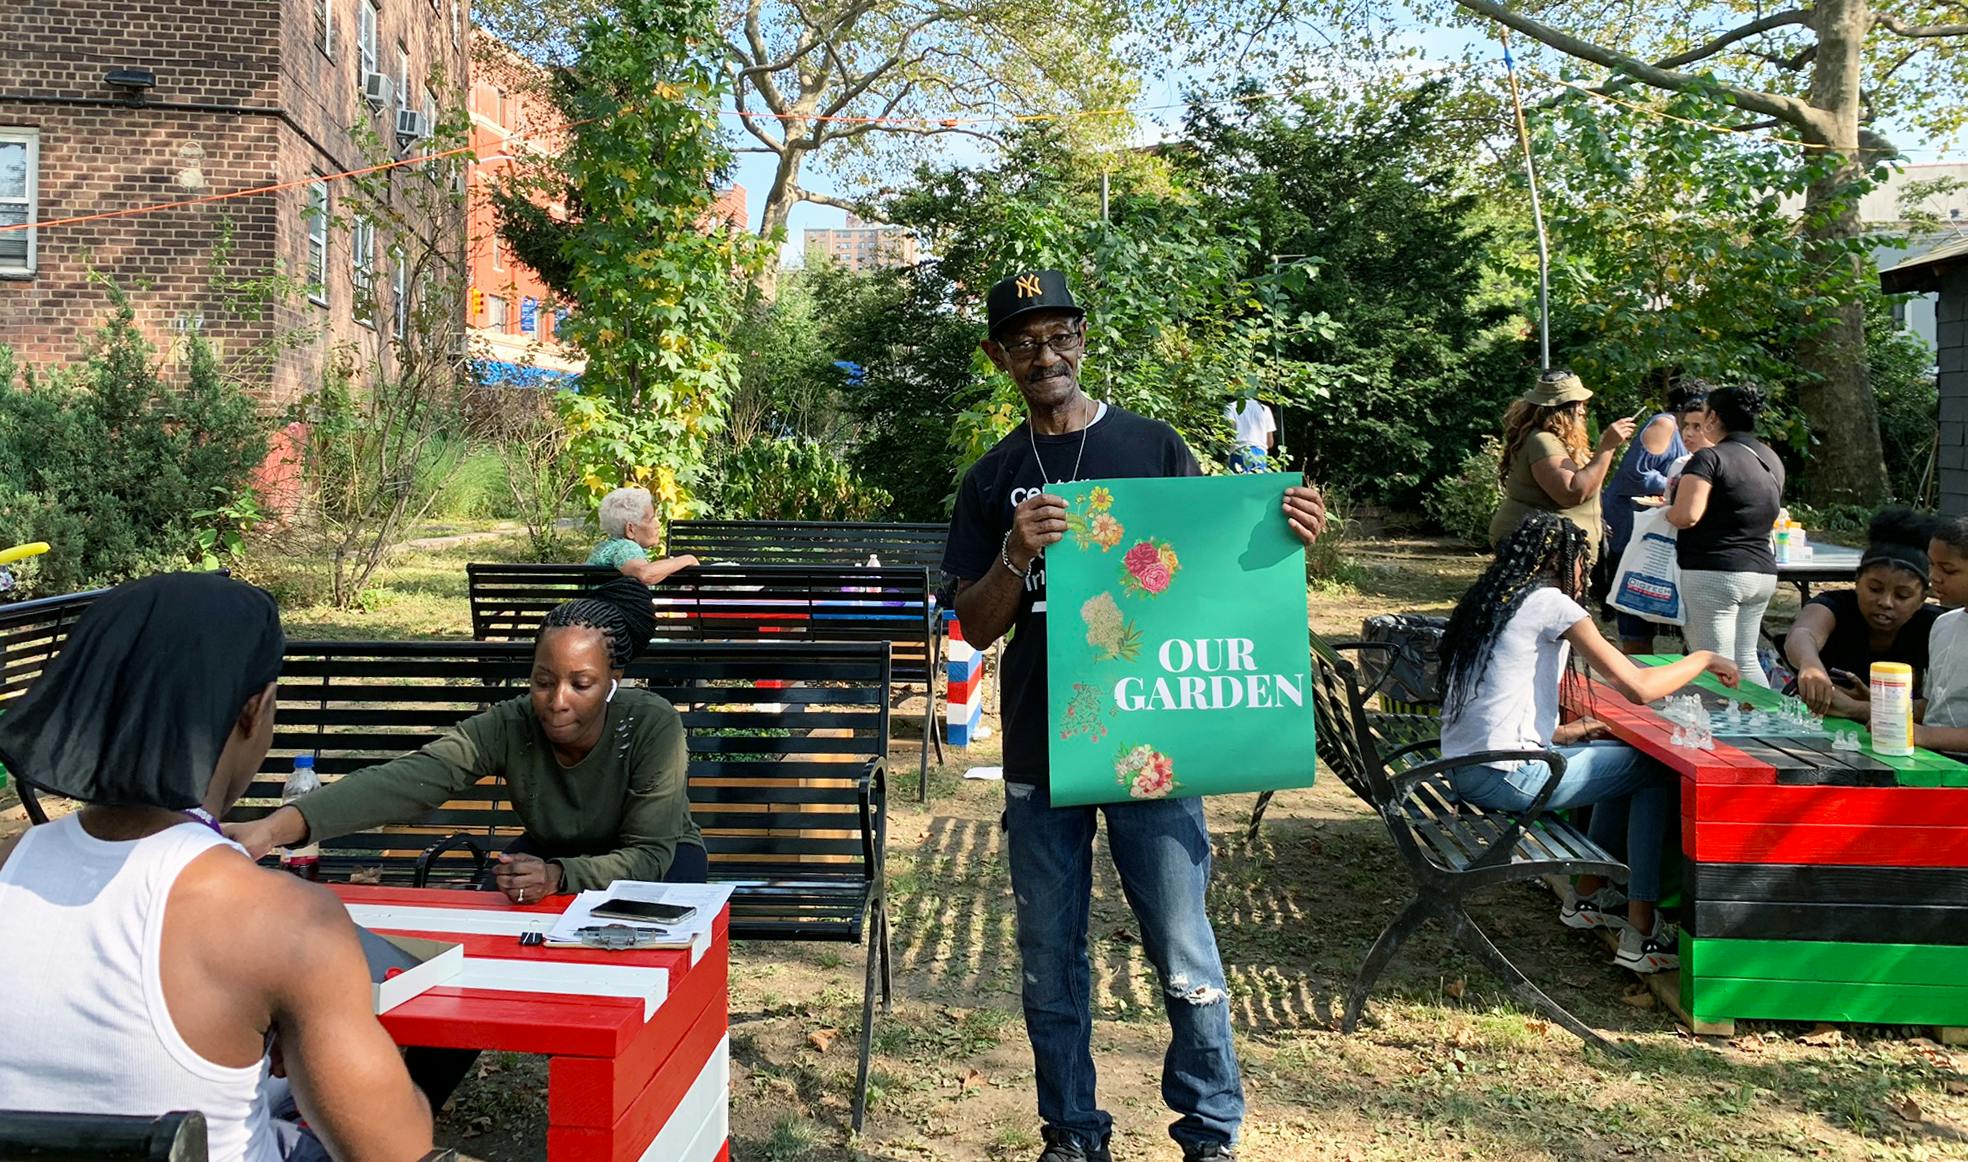 Eric Murray, long-time resident, community garden advocate and NeighborhoodStat founding member, holding up a mock-up of the garden sign during an event activating four community gardens and celebrating culture in 2019.